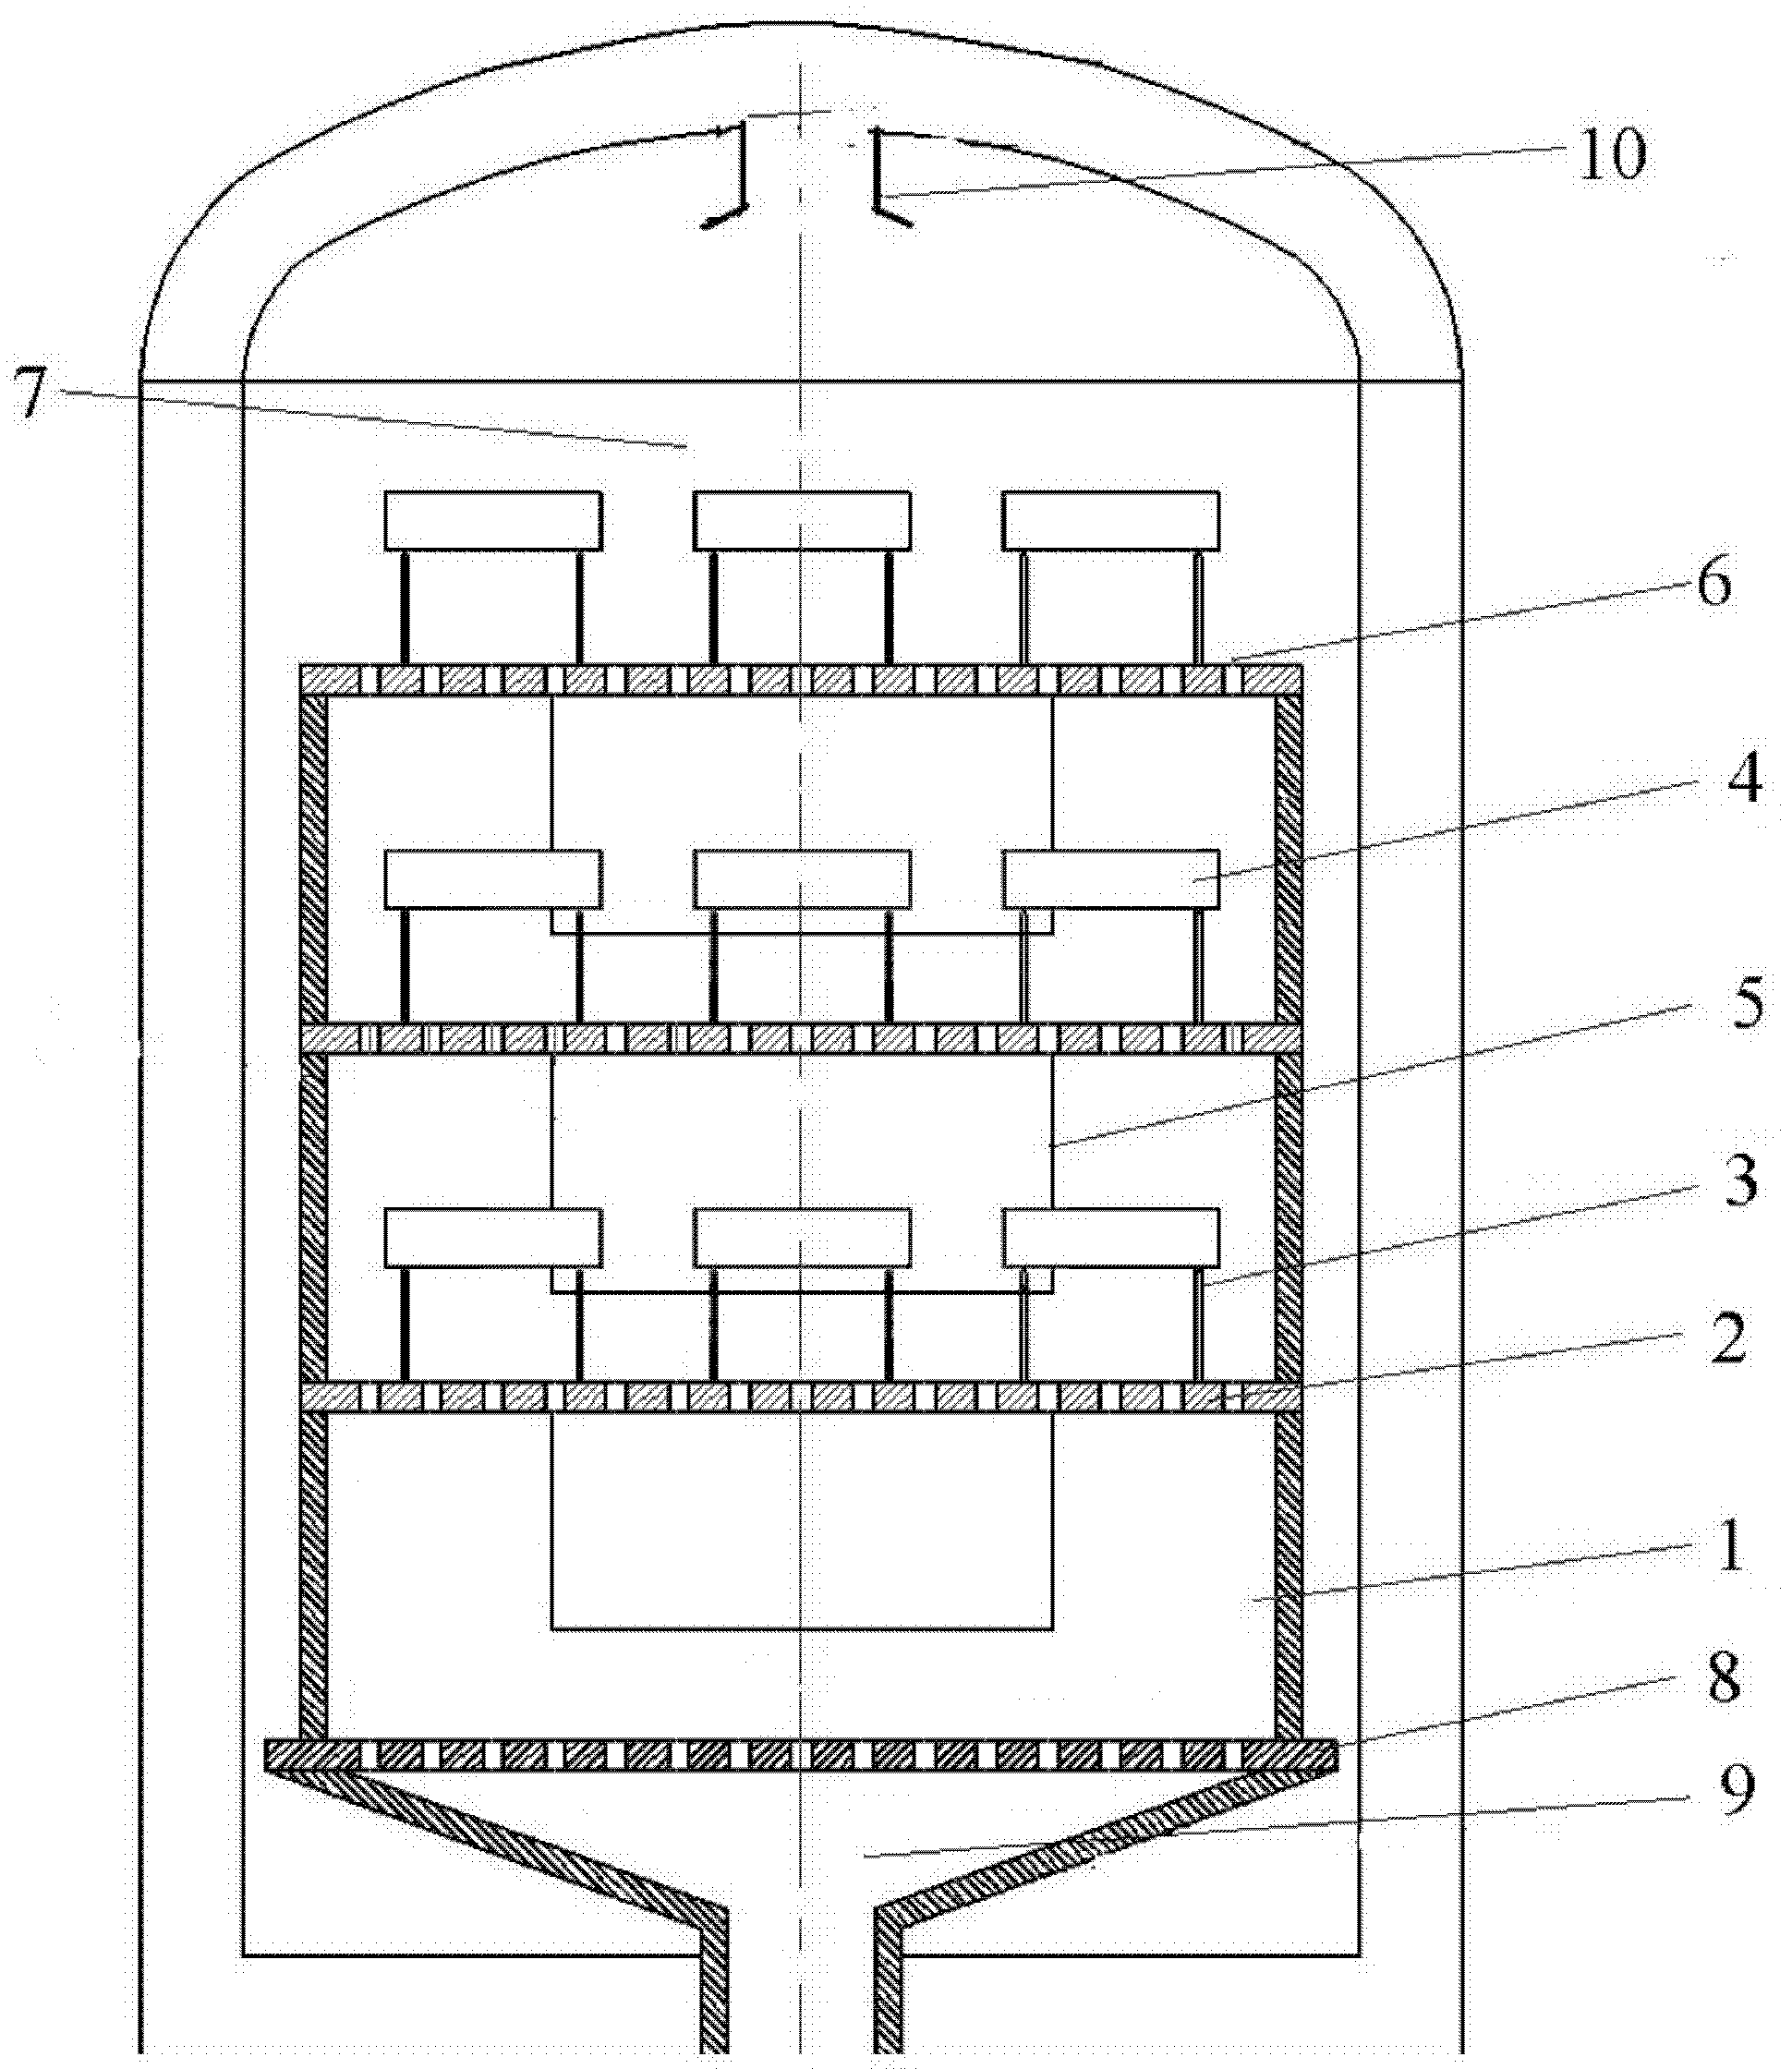 Multi-layer product support for vapor deposition, and chemical vapor deposition reaction chamber